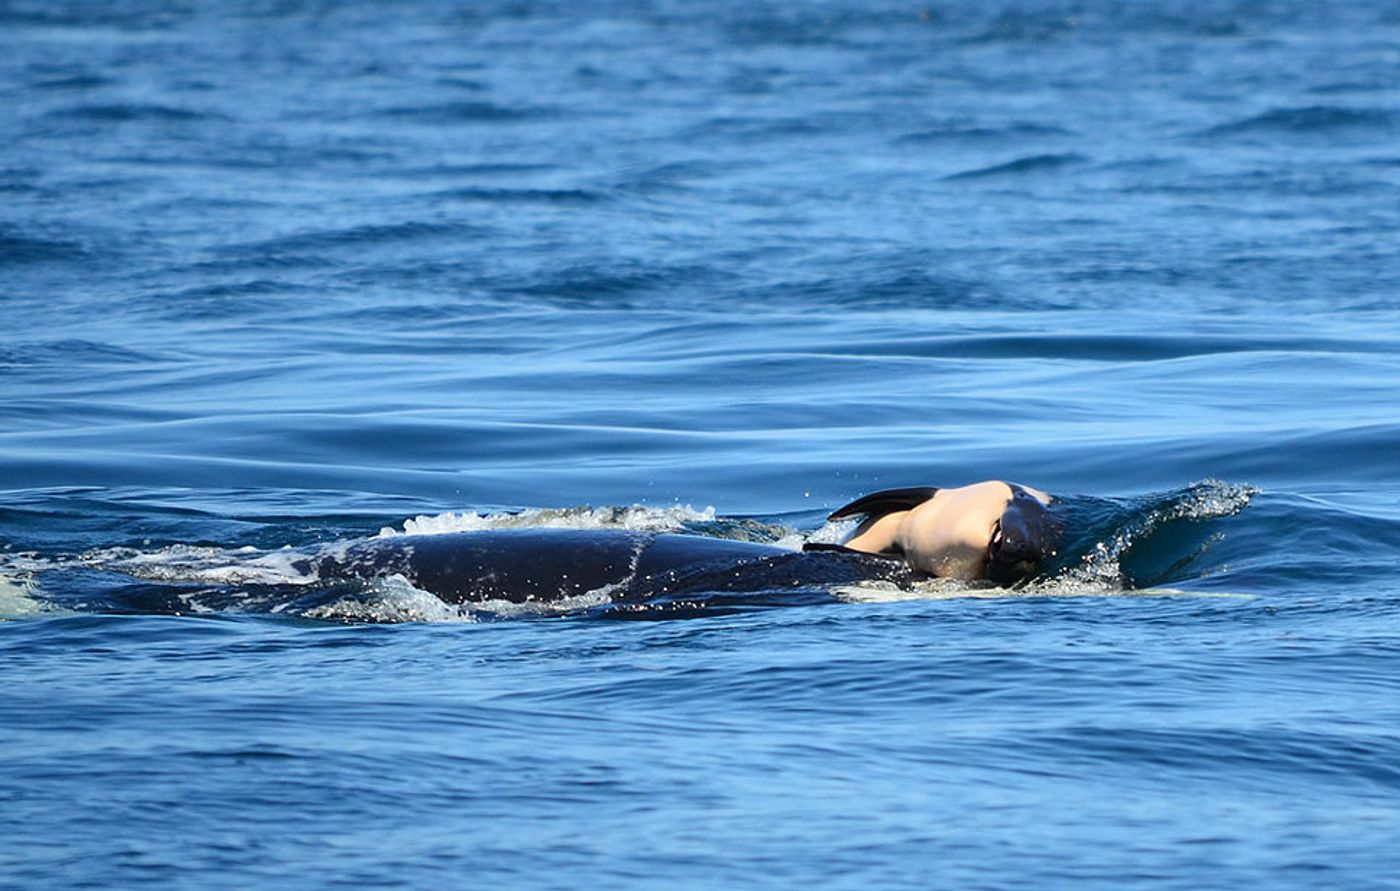 An orca swims with her deceased calf in the Pacific Ocean.